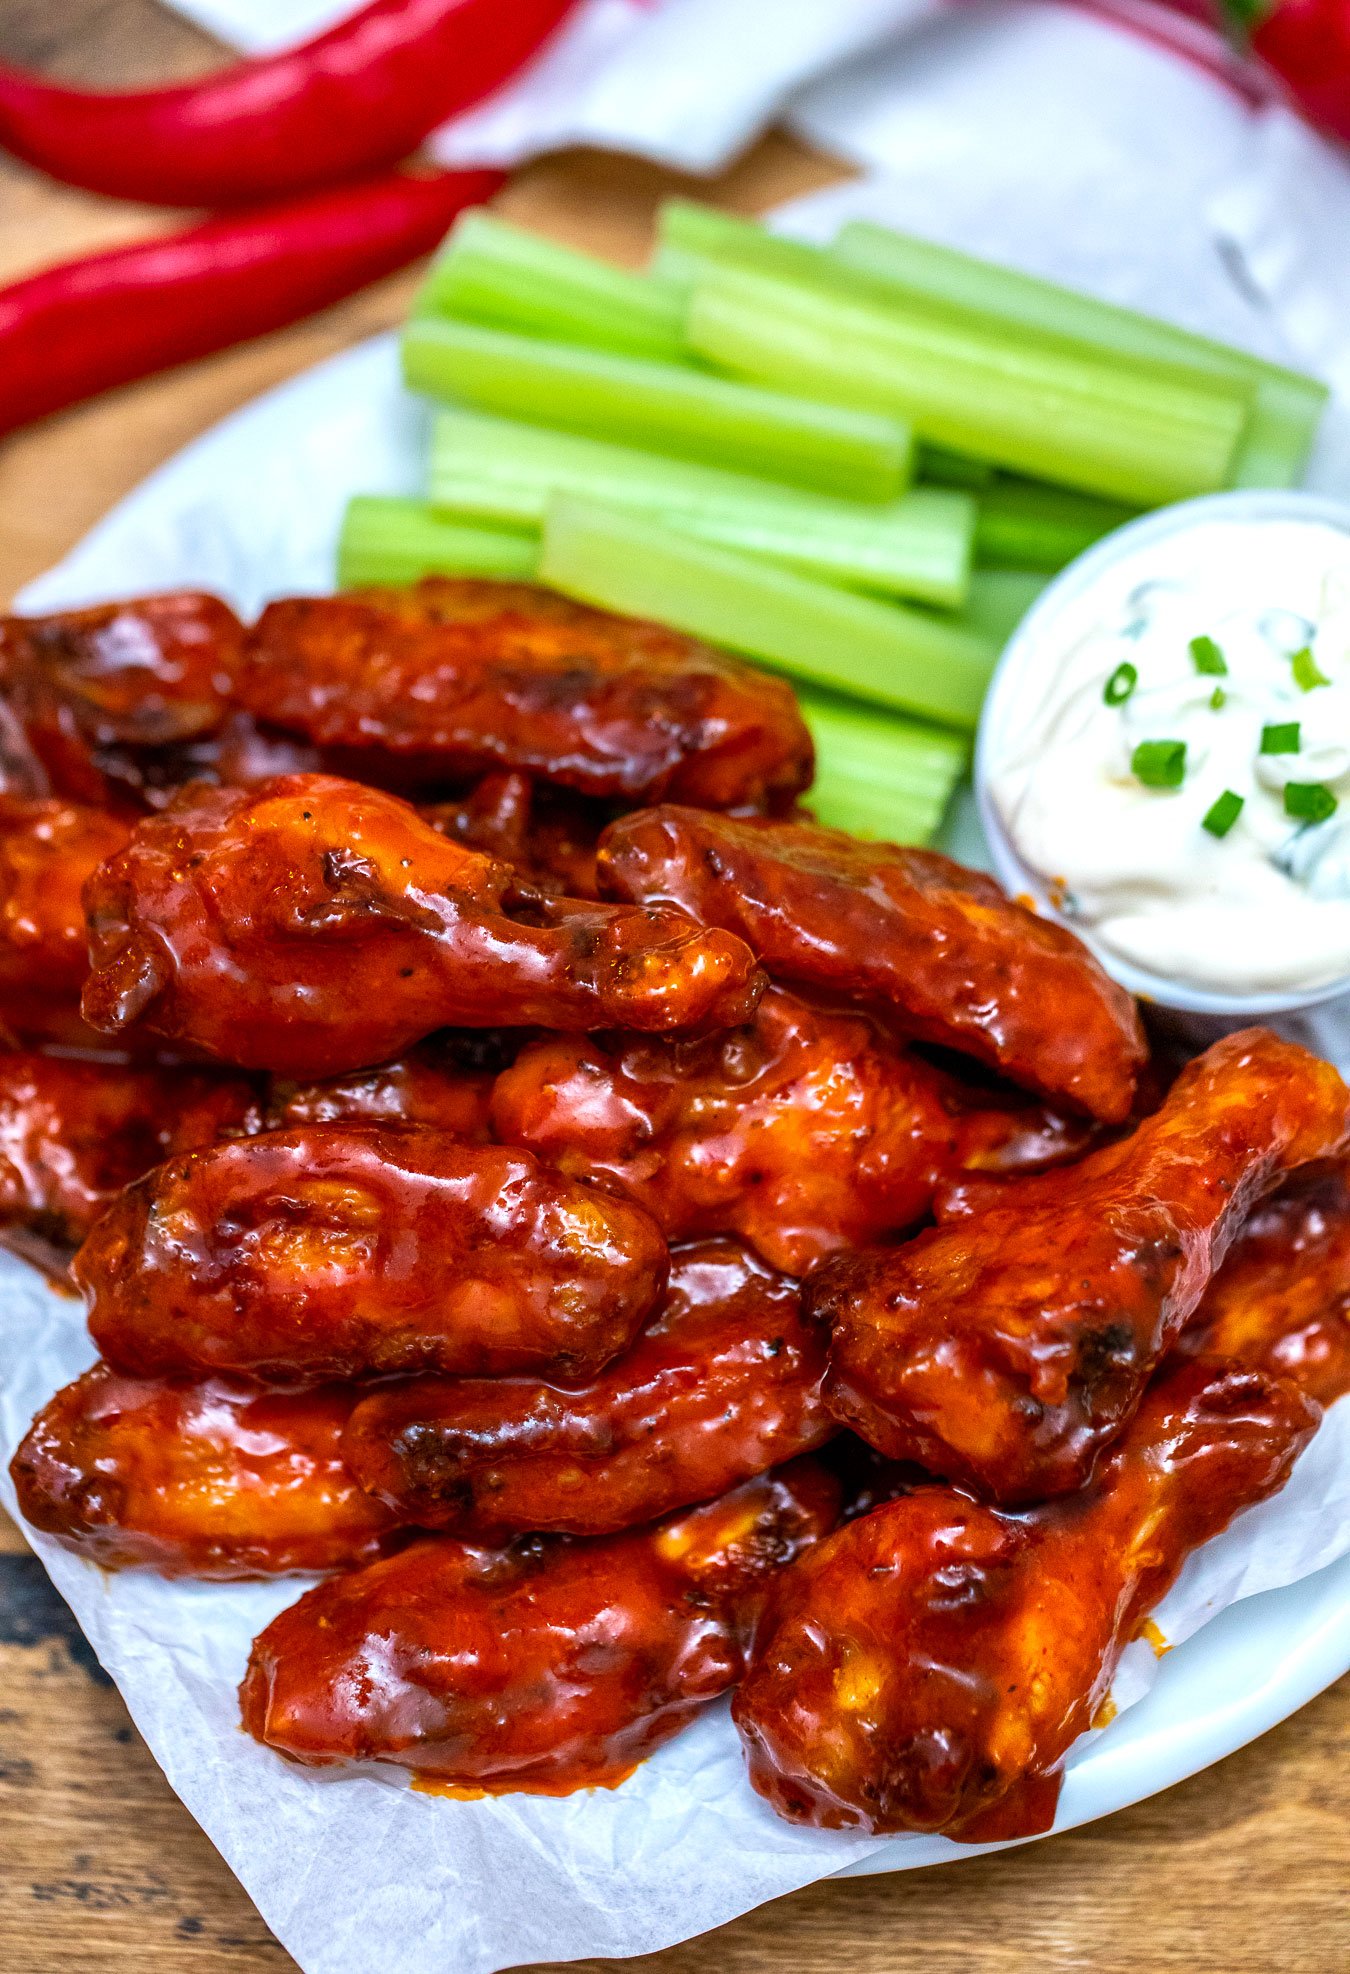 Baked Buffalo Wings Recipe [Video] - Sweet and Savory Meals